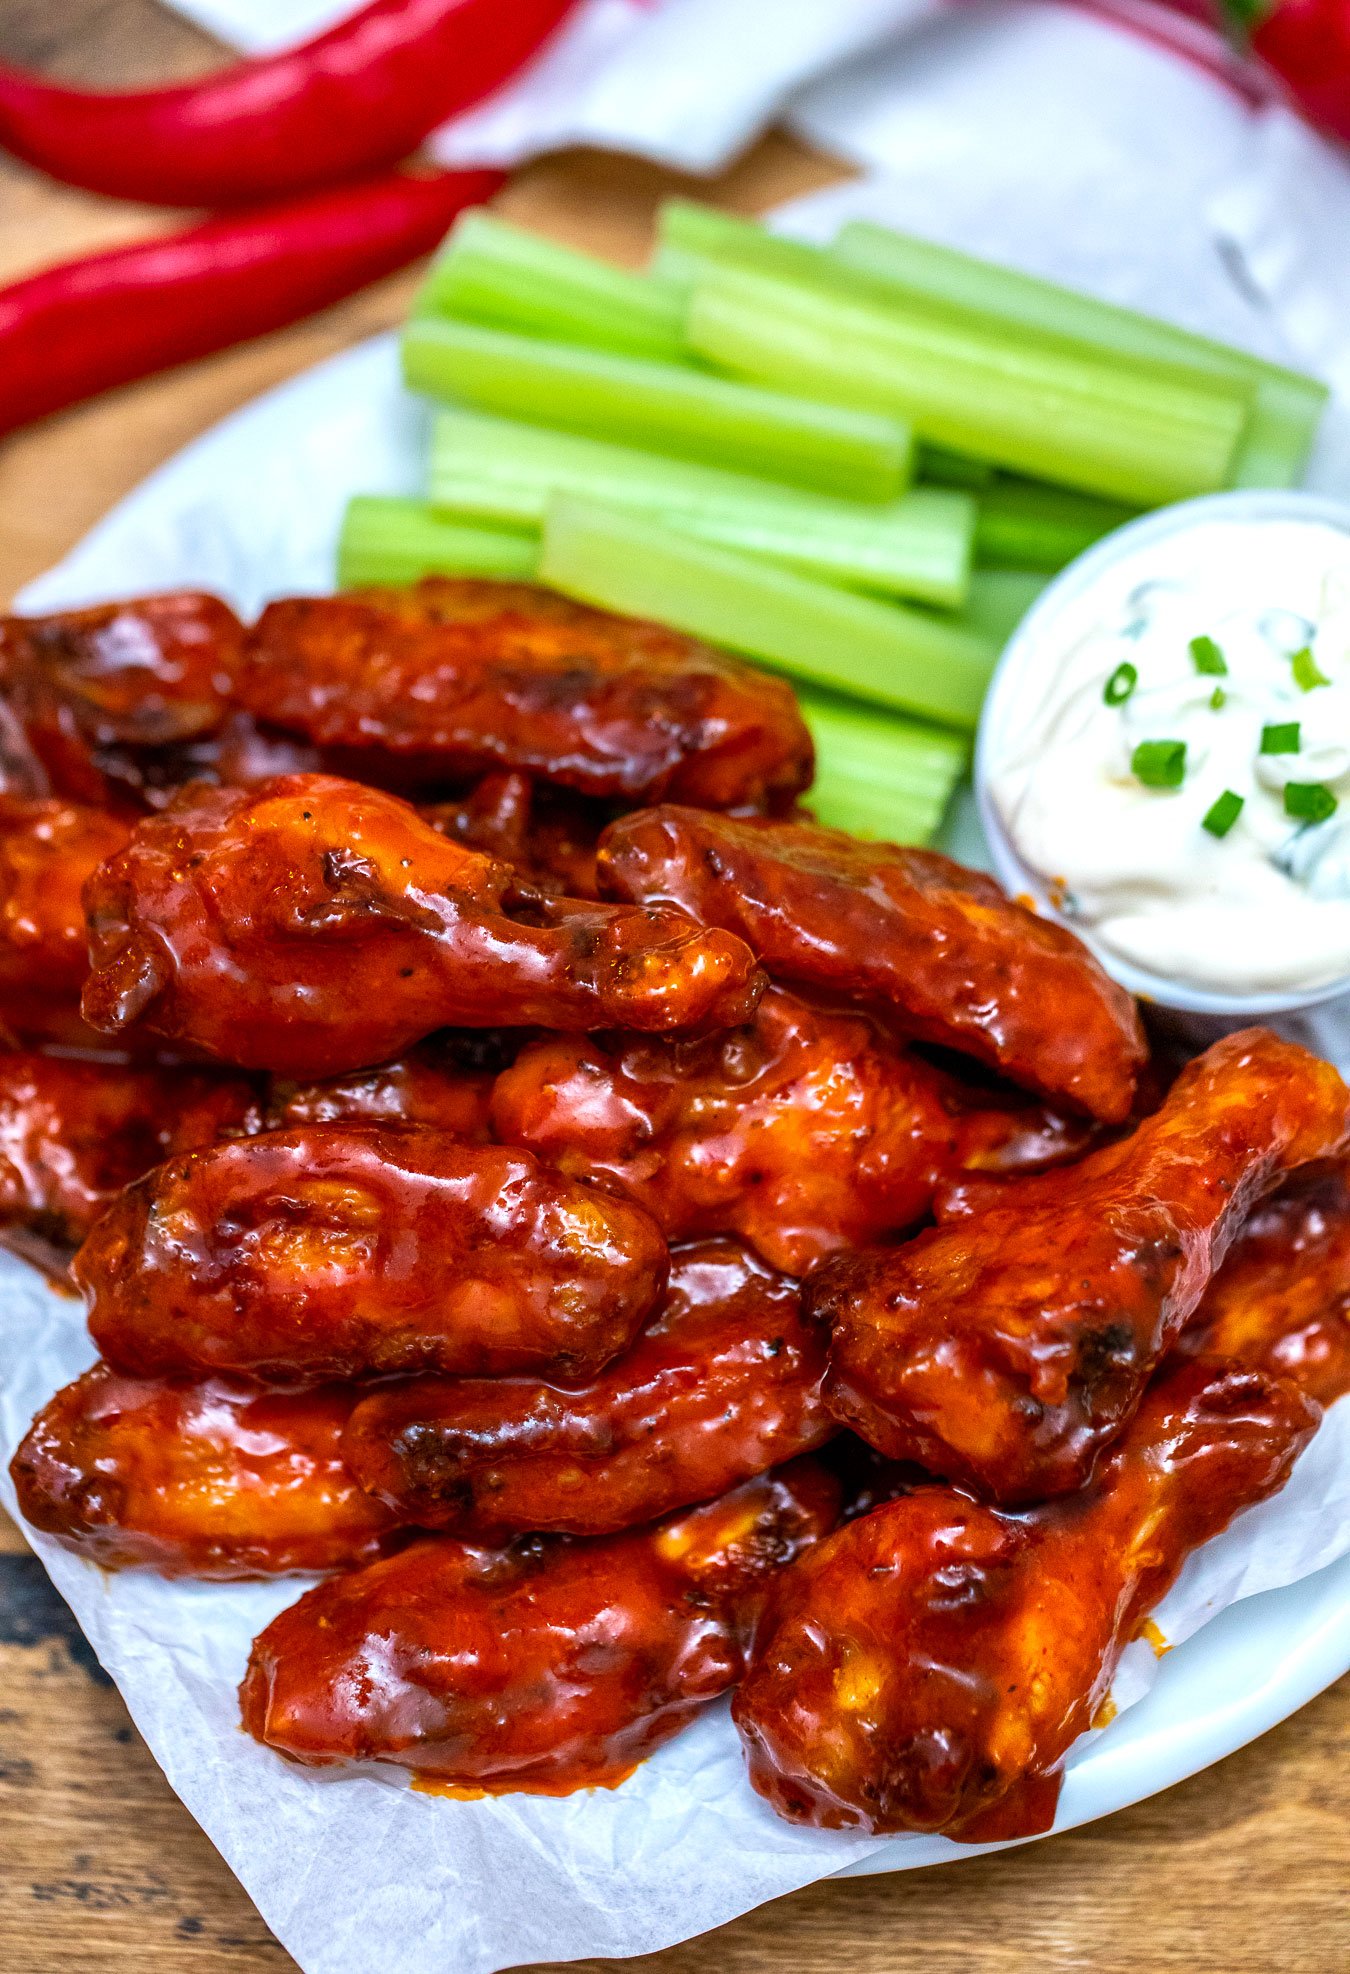 Baked Buffalo Wings Recipe [Video] - Sweet and Savory Meals